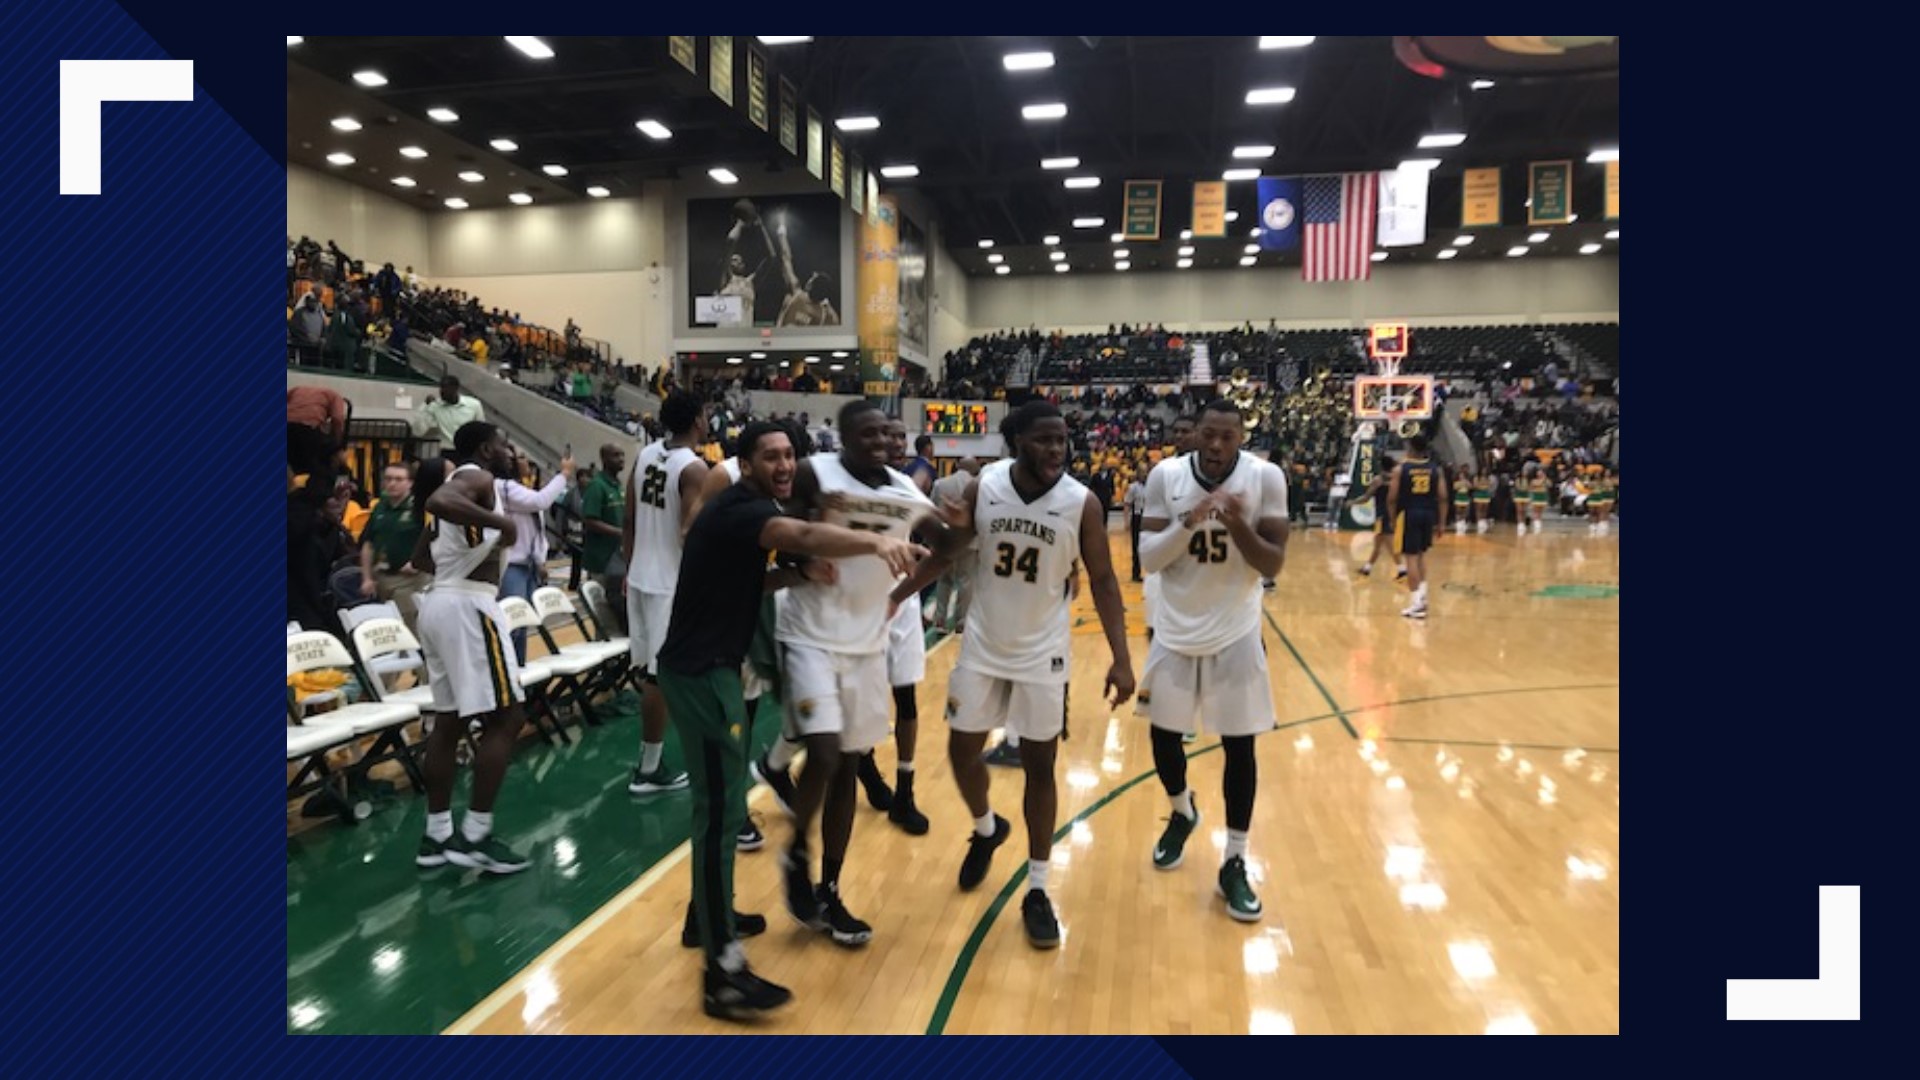 Norfolk State stepped on North Carolina A&T from the start to win 76-58. They now lead the MEAC by 2 games.